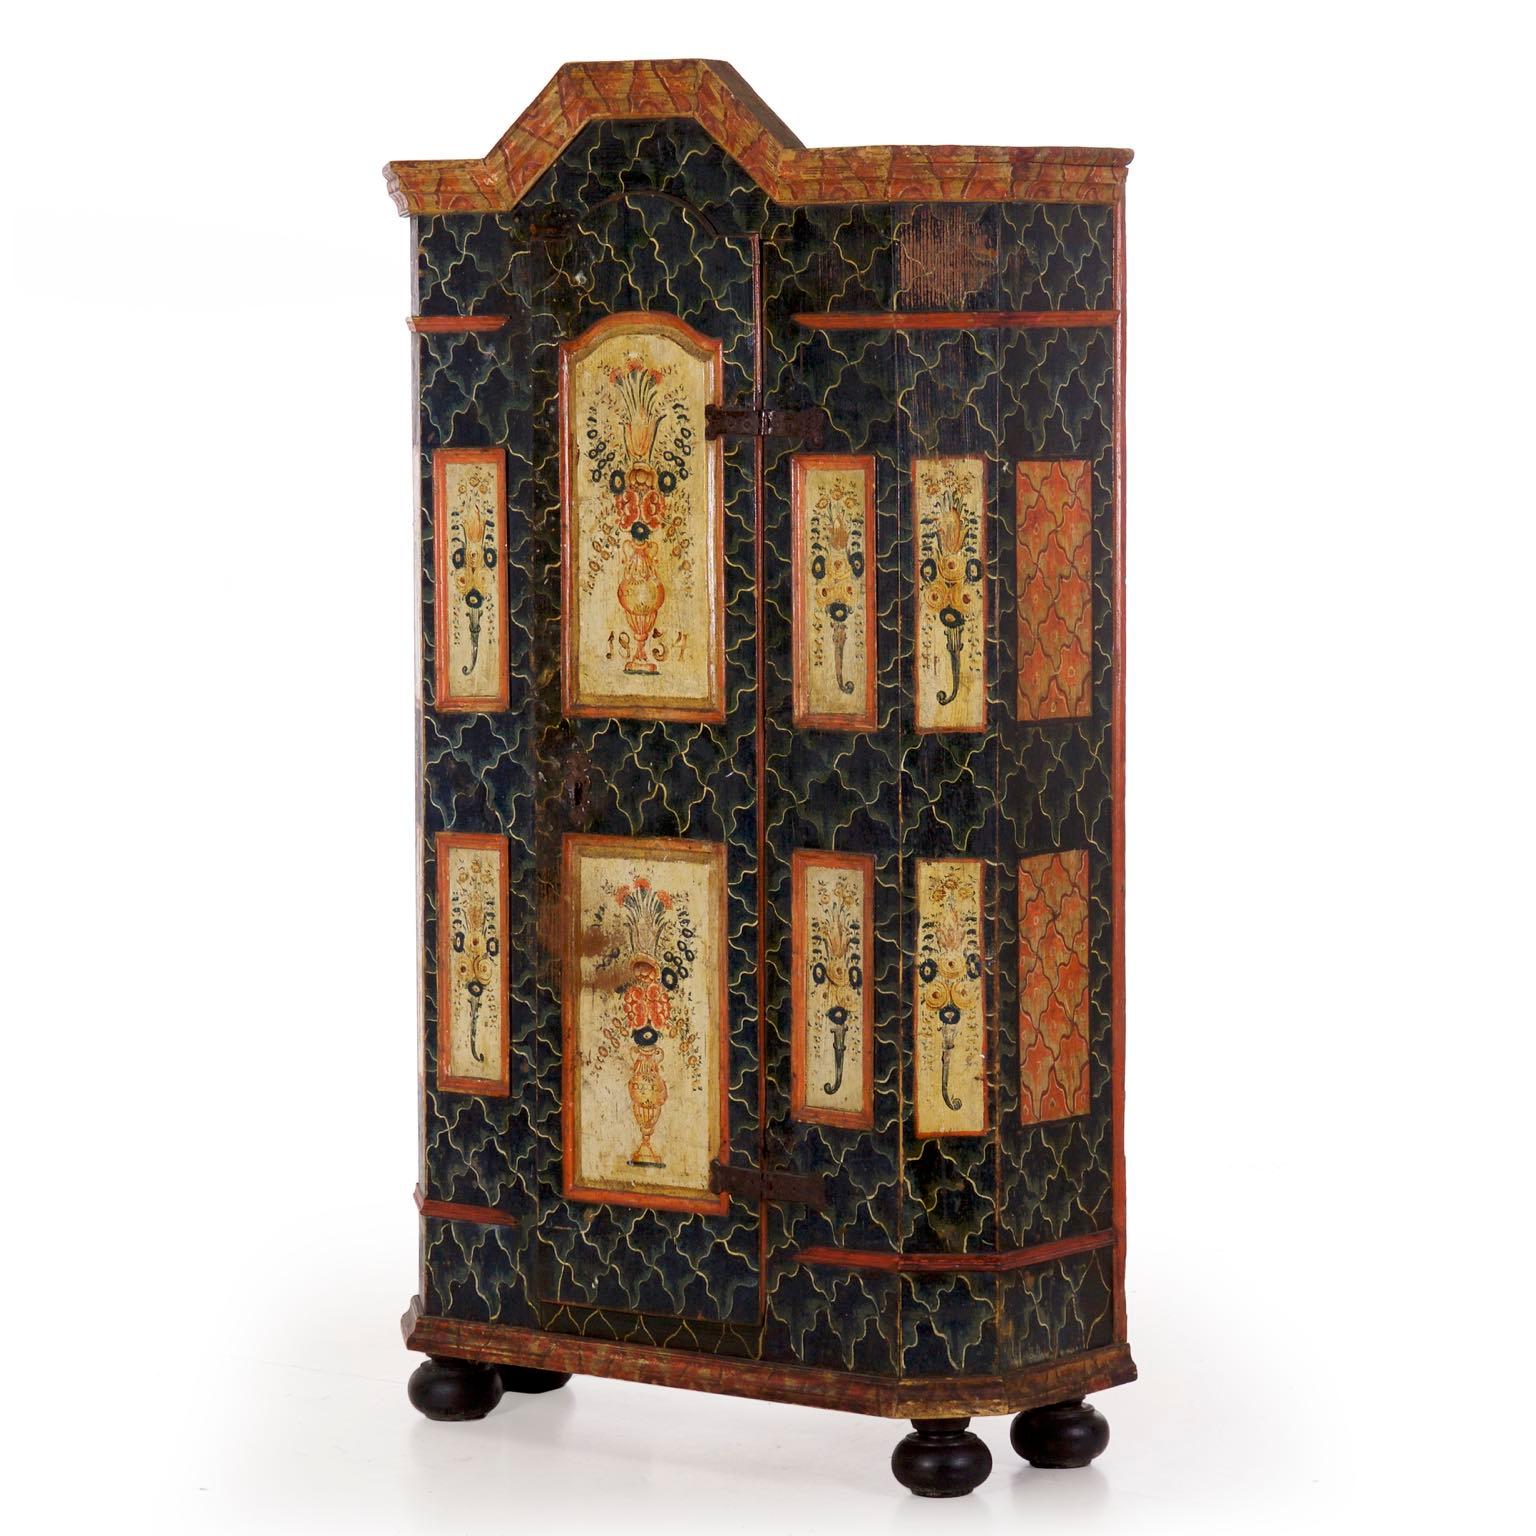 The faceted angular body of this armoire works to relieve the weight of the form, overall being a rather unusual form for its diminutive overall size. It is an object that was carefully constructed such that it would not overwhelm a room. Four